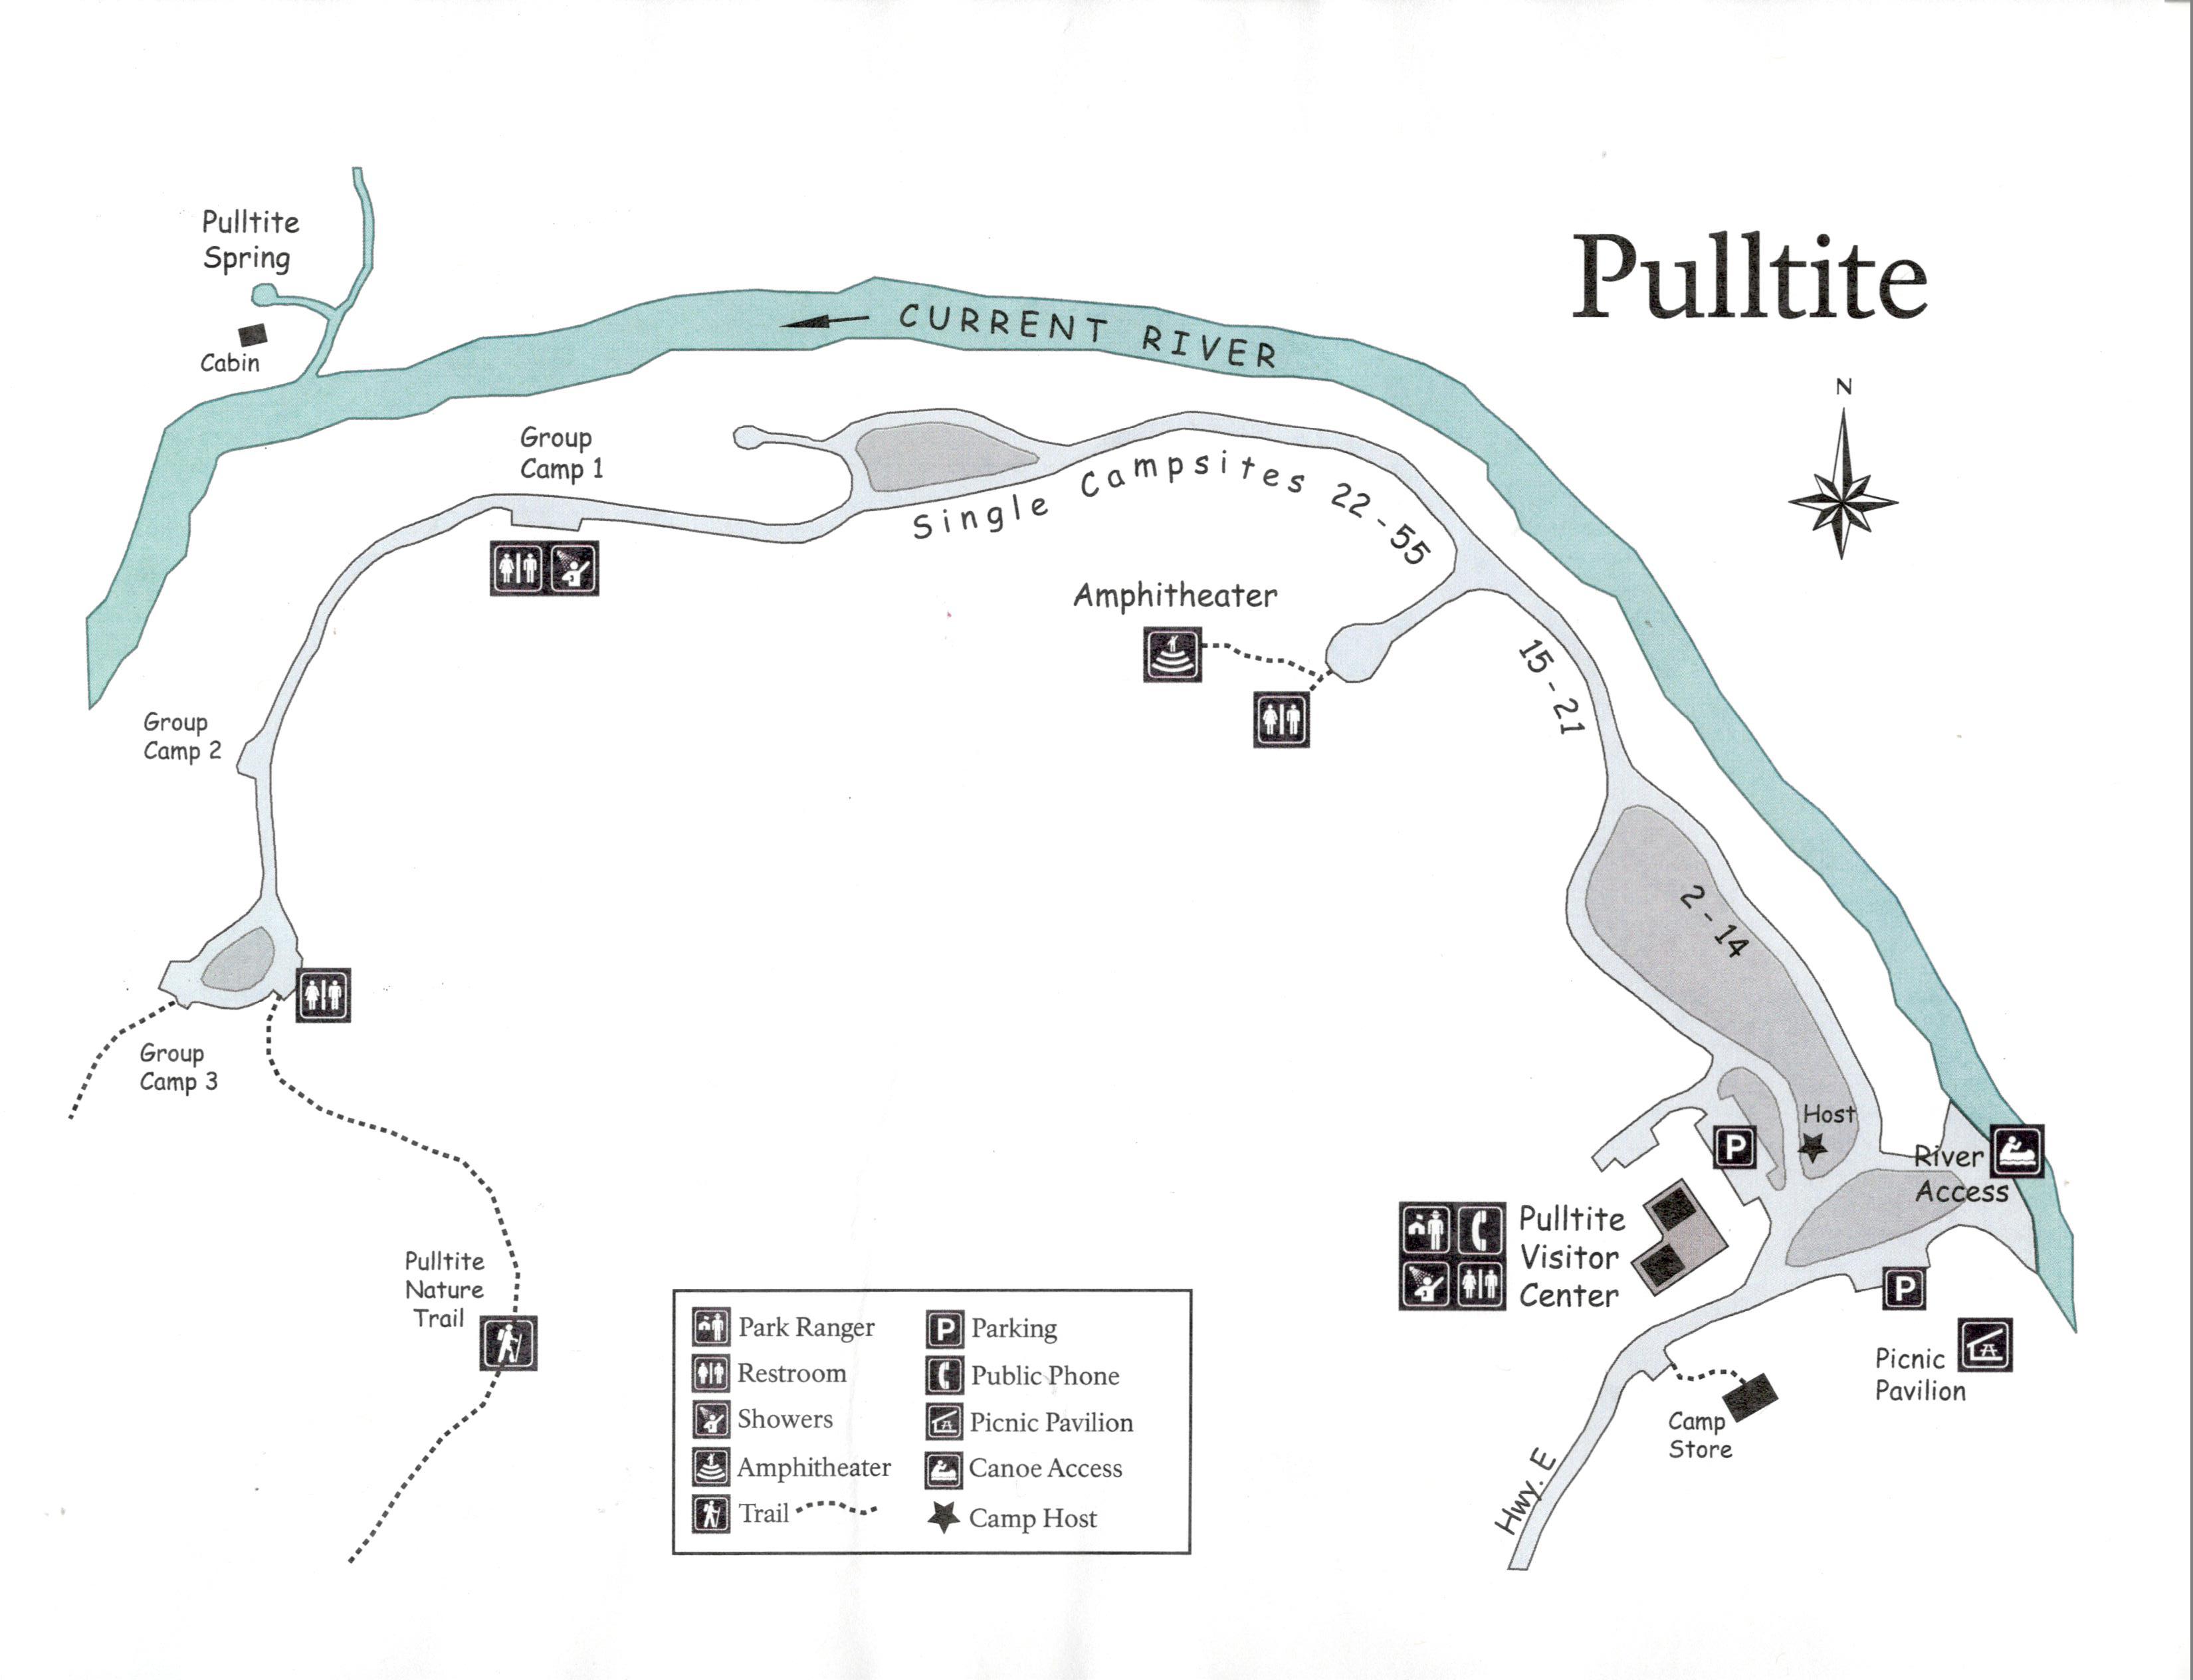 A map showing campsites, restrooms, ranger station, river access, phone, information